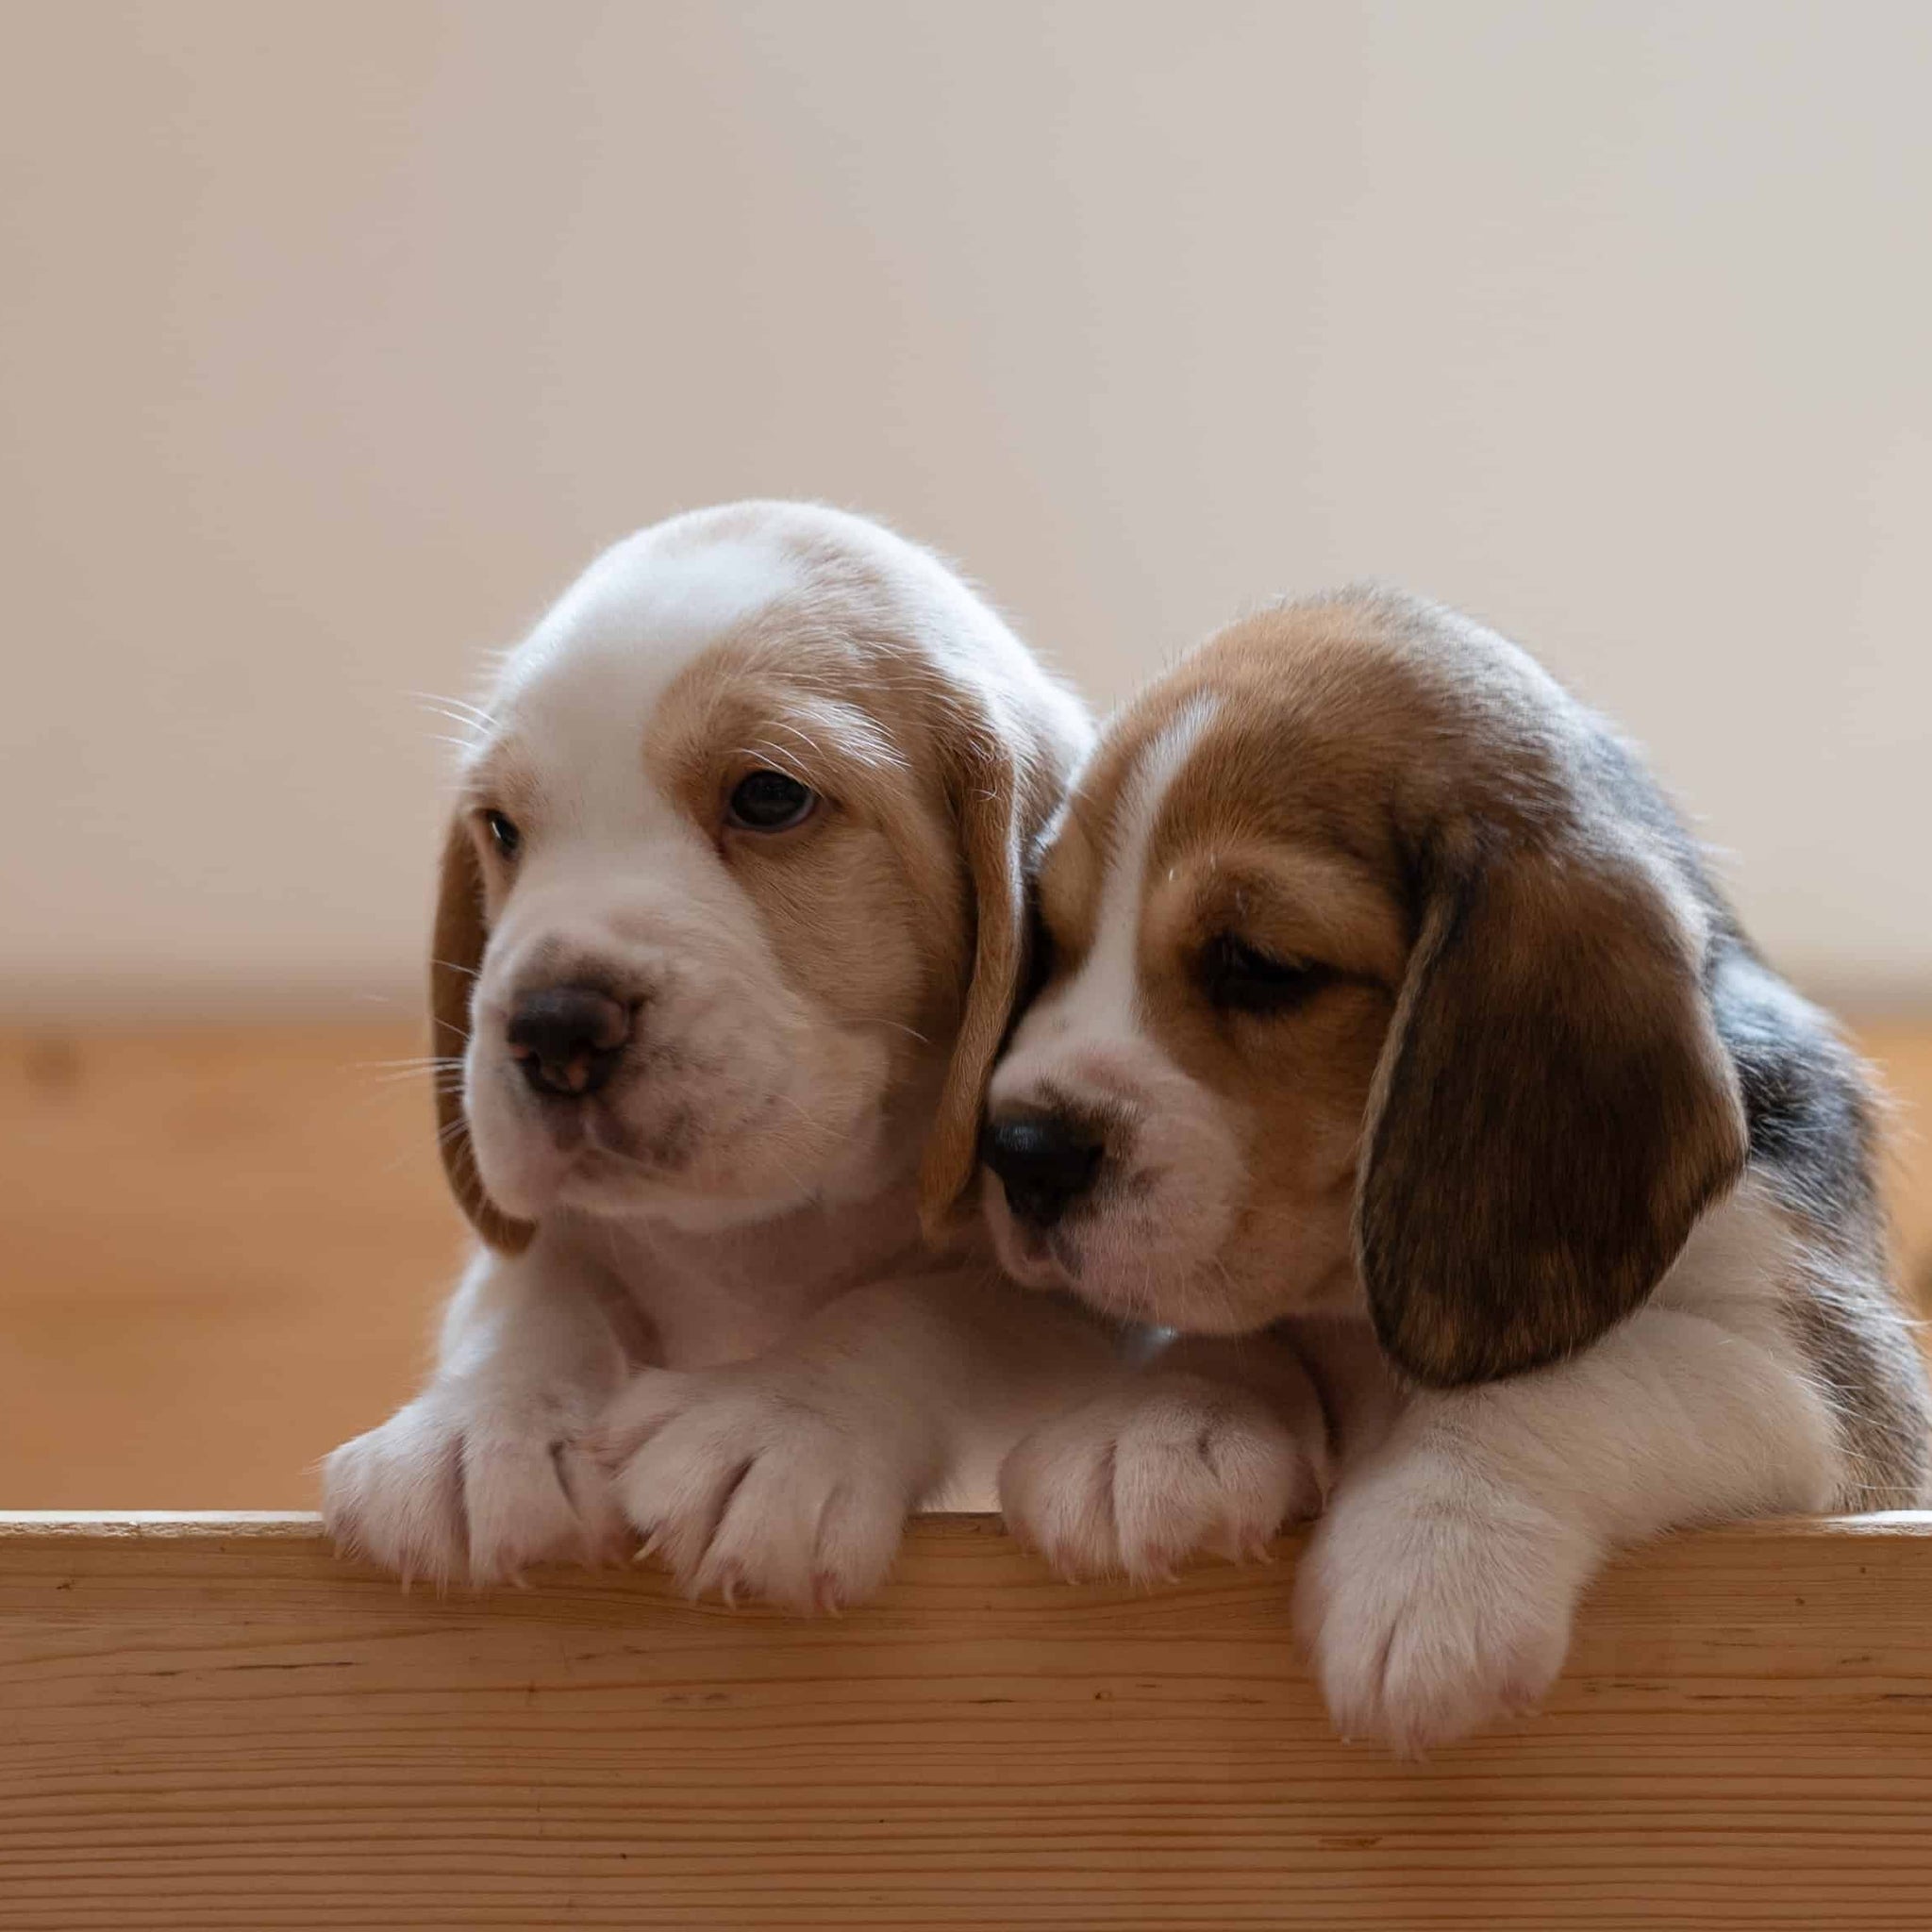 Two small puppies sitting in a wooden crate